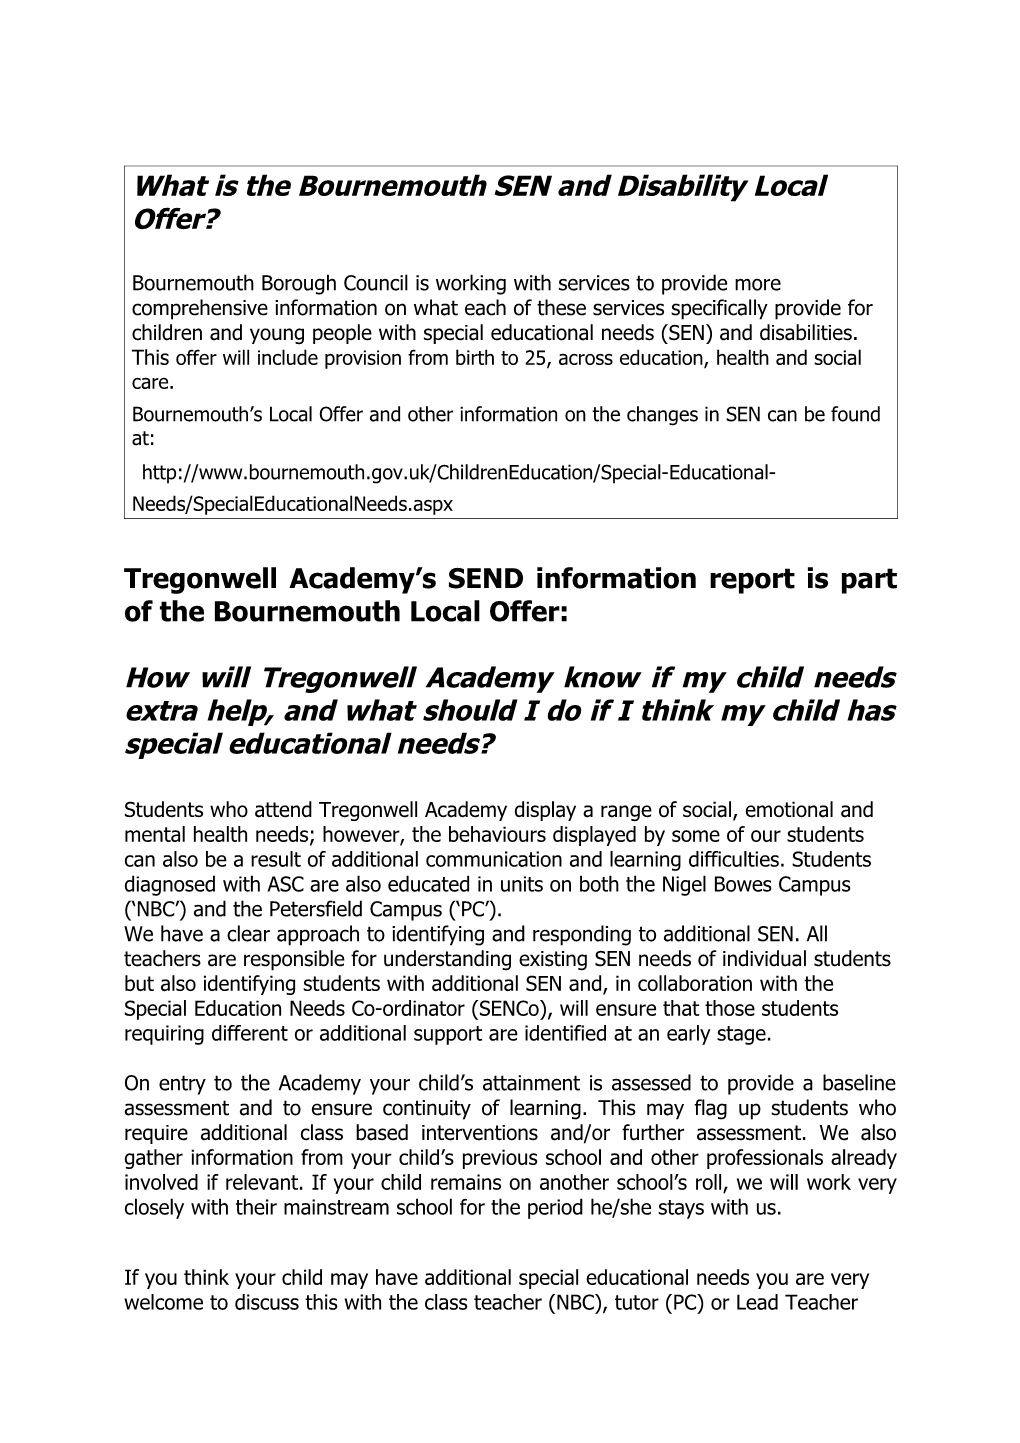 Tregonwell Academy S SEND Information Report Is Part of the Bournemouth Local Offer